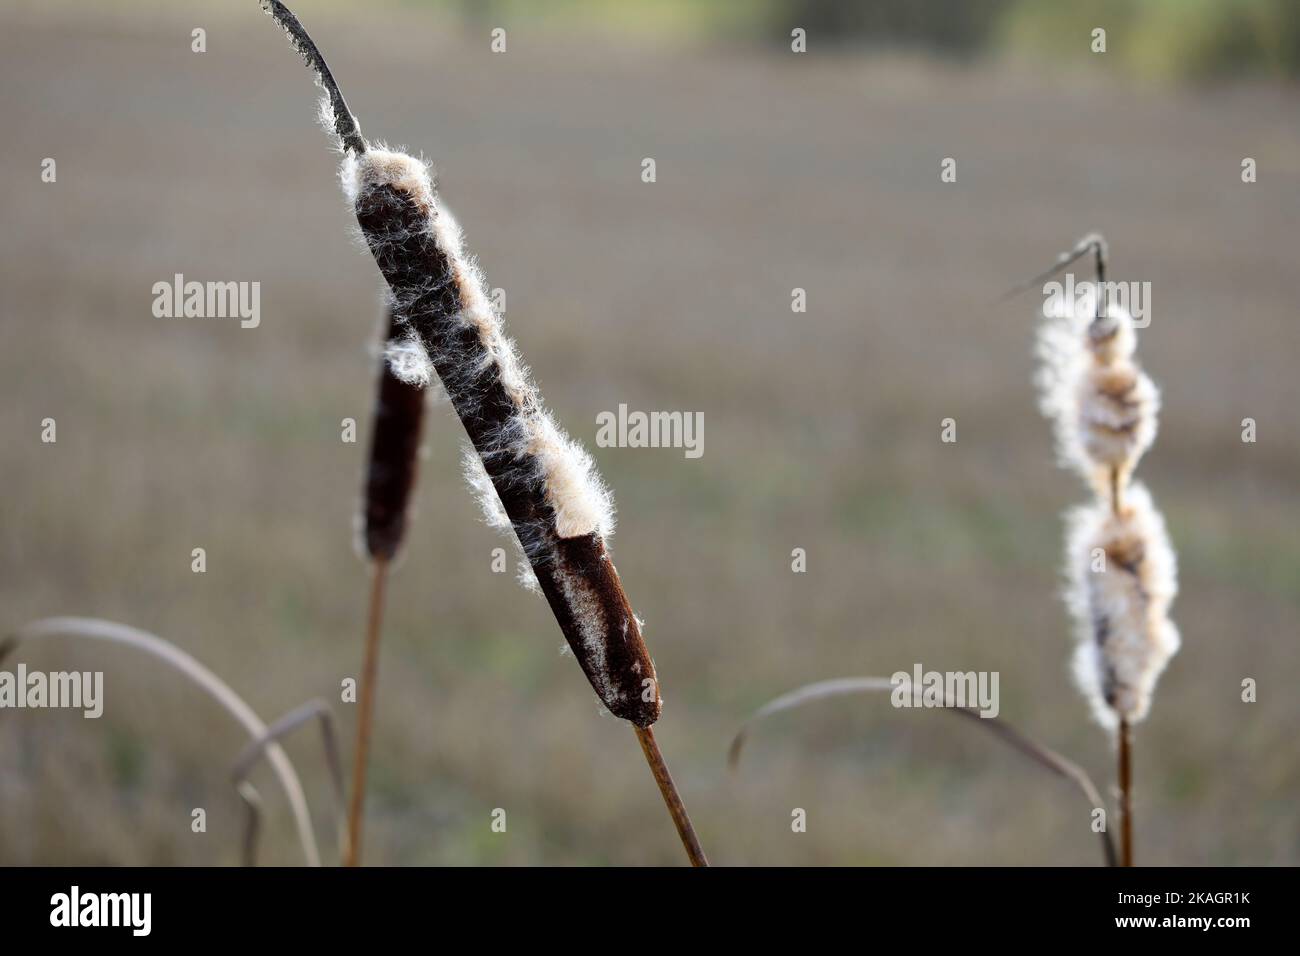 Ripe seedheads of Typha latifolia, also called Bulrush or Common Cattail, in winter. The cottony fluff will disperse by wind. Shallow DOF. Stock Photo